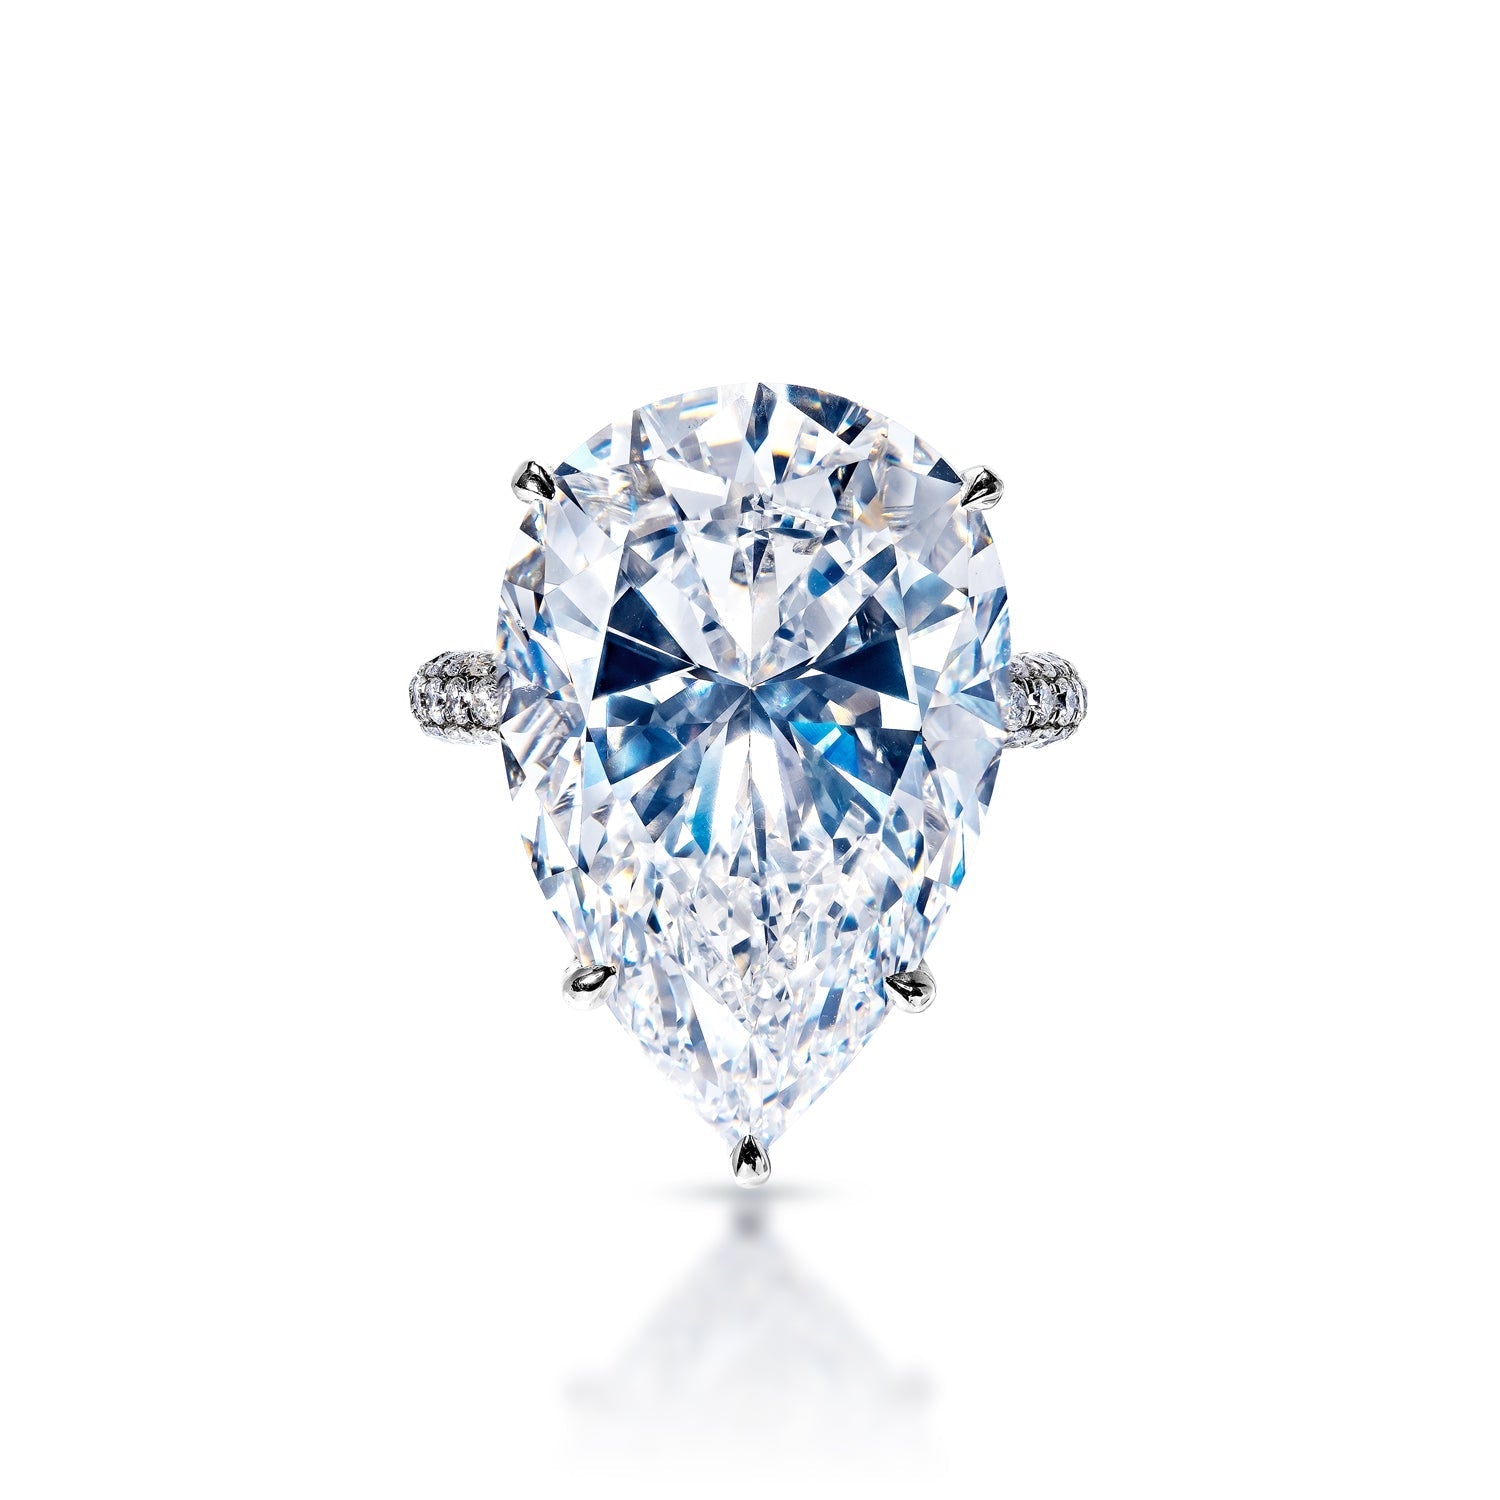 Valeria 24 Carat F VVS2 Pear Shape Diamond Engagement Ring in Platinum. GIA Certified Front View